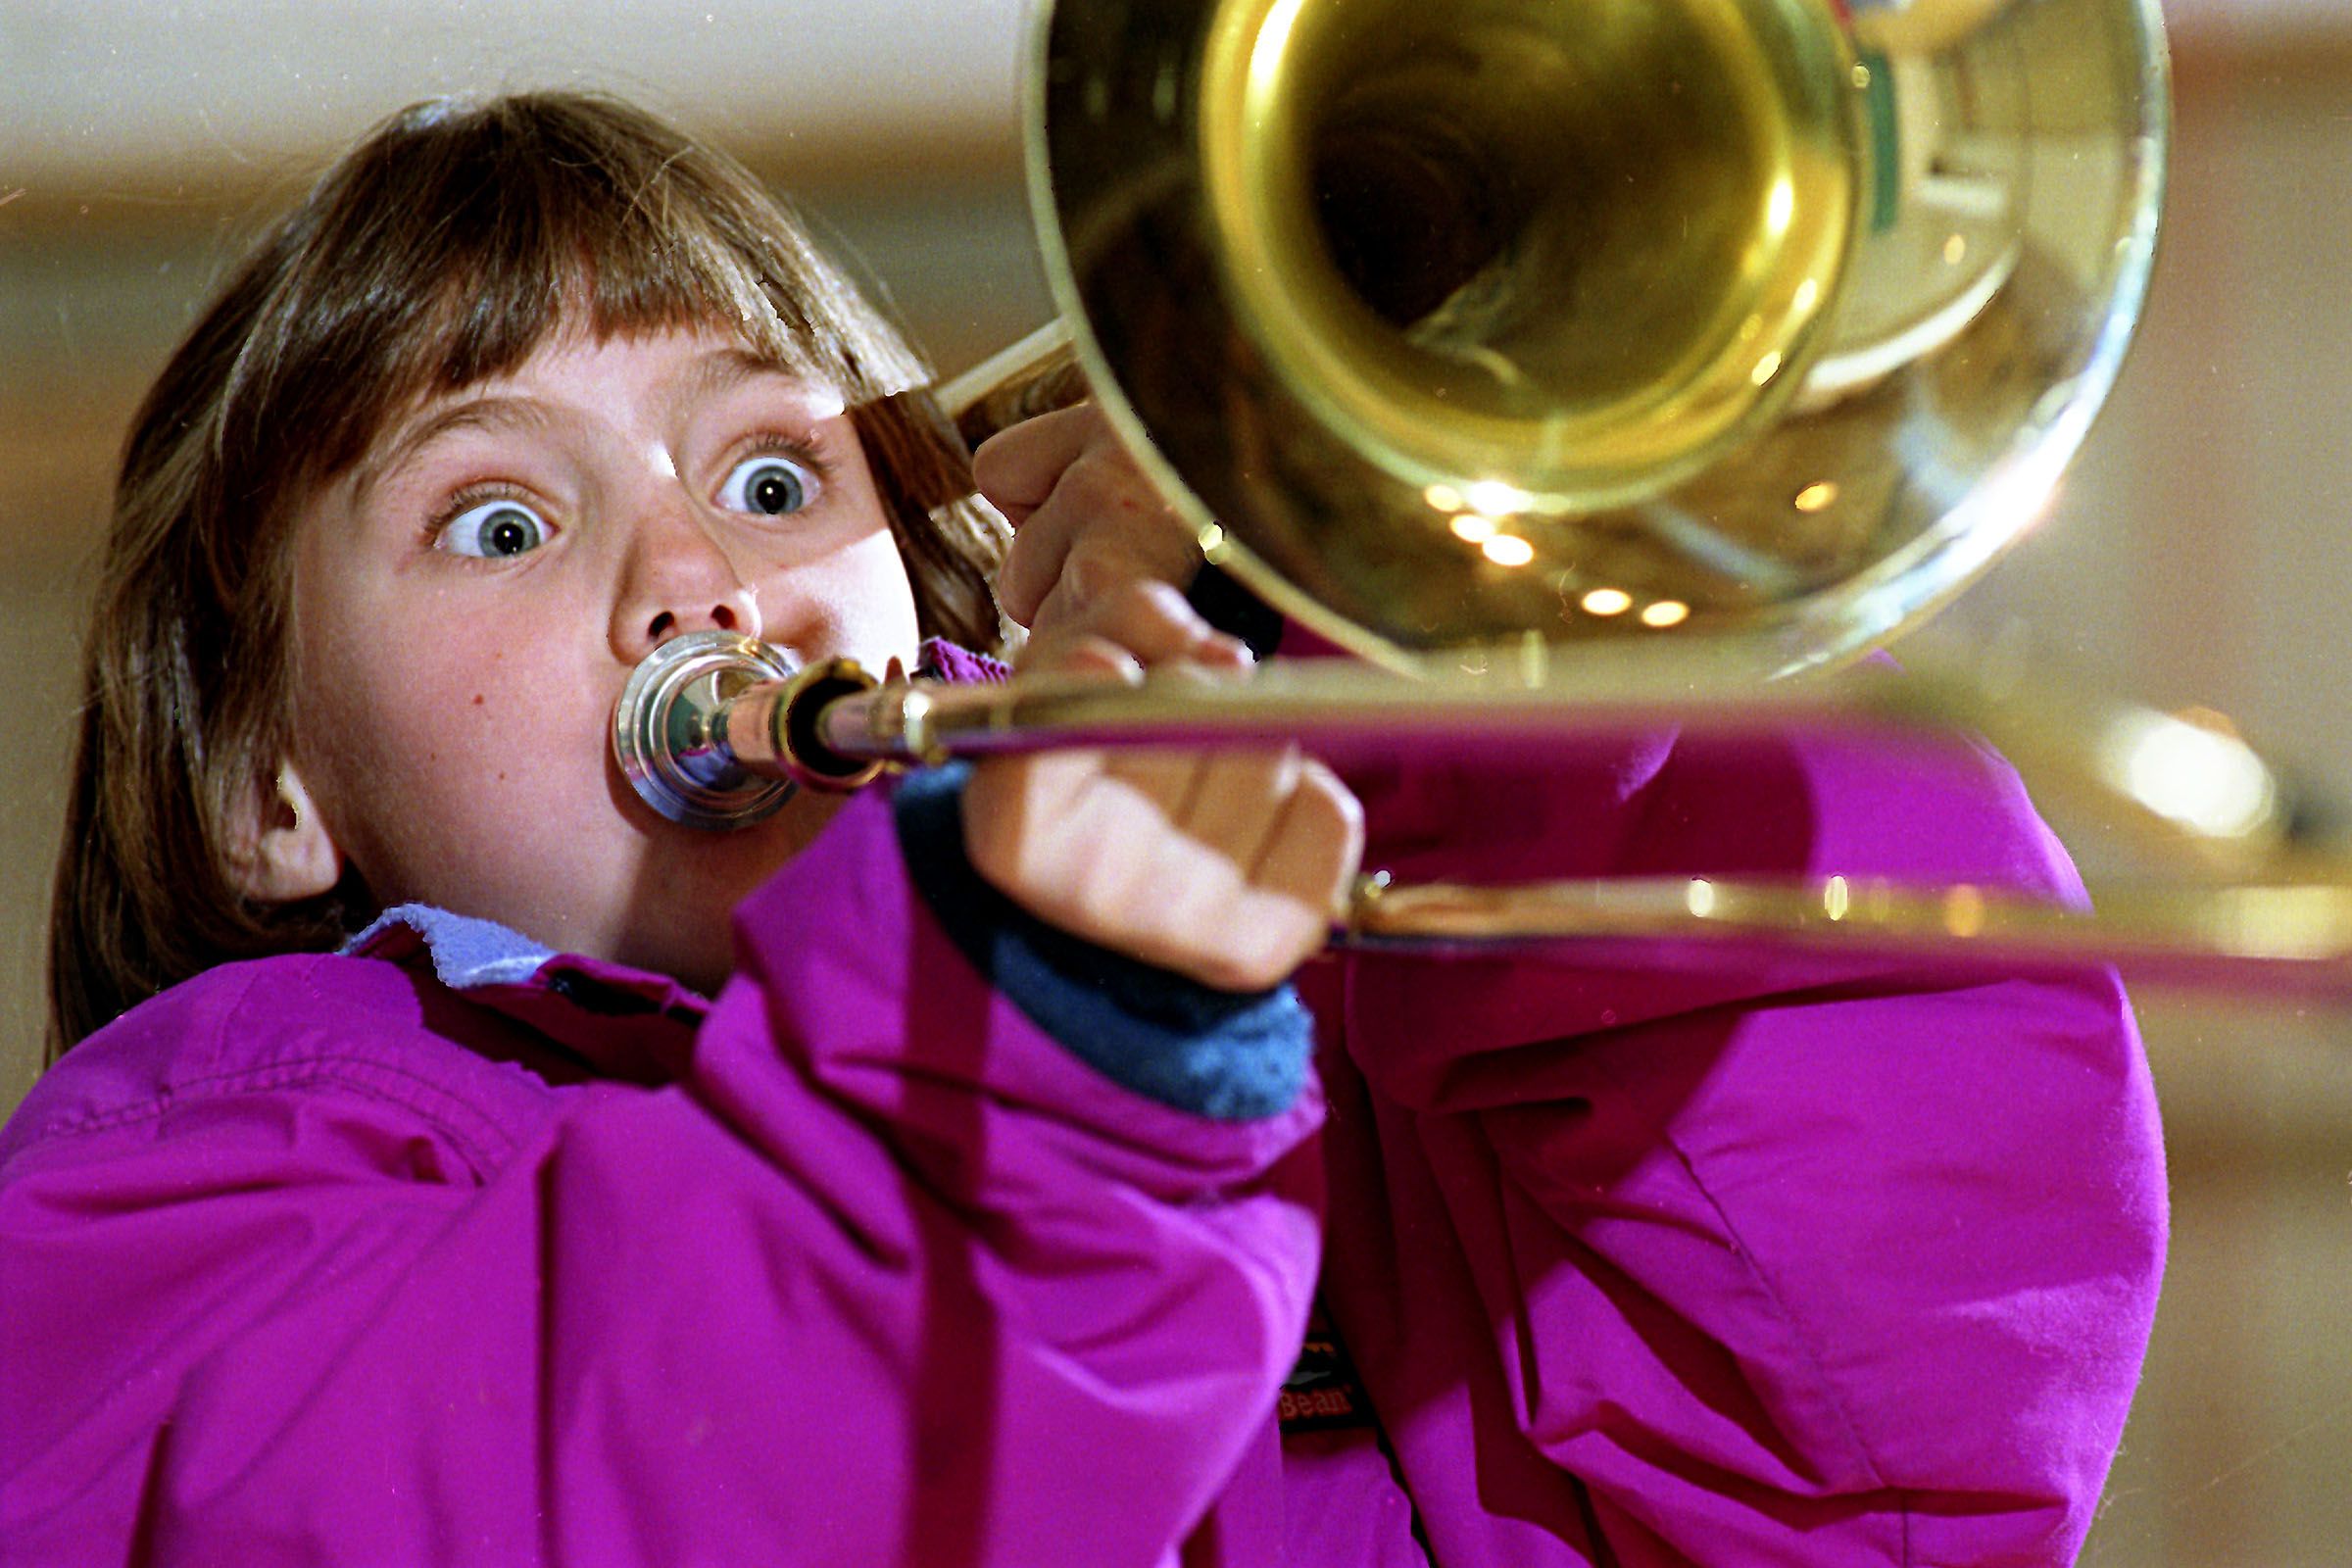 Fourth-grader Kathryn Harris, 9, tries out a trombone during a demonstration of band instruments by David Ellis of Ellis Music Co. at Marion Cross Elementary School in Norwich, Vt., on March 4, 1994. Ellis is carrying on a tradition started by his father, Richard Ellis, more than 45 years ago. (Valley News - Geoff Hansen) Copyright Valley News. May not be reprinted or used online without permission. Send requests to permission@vnews.com.